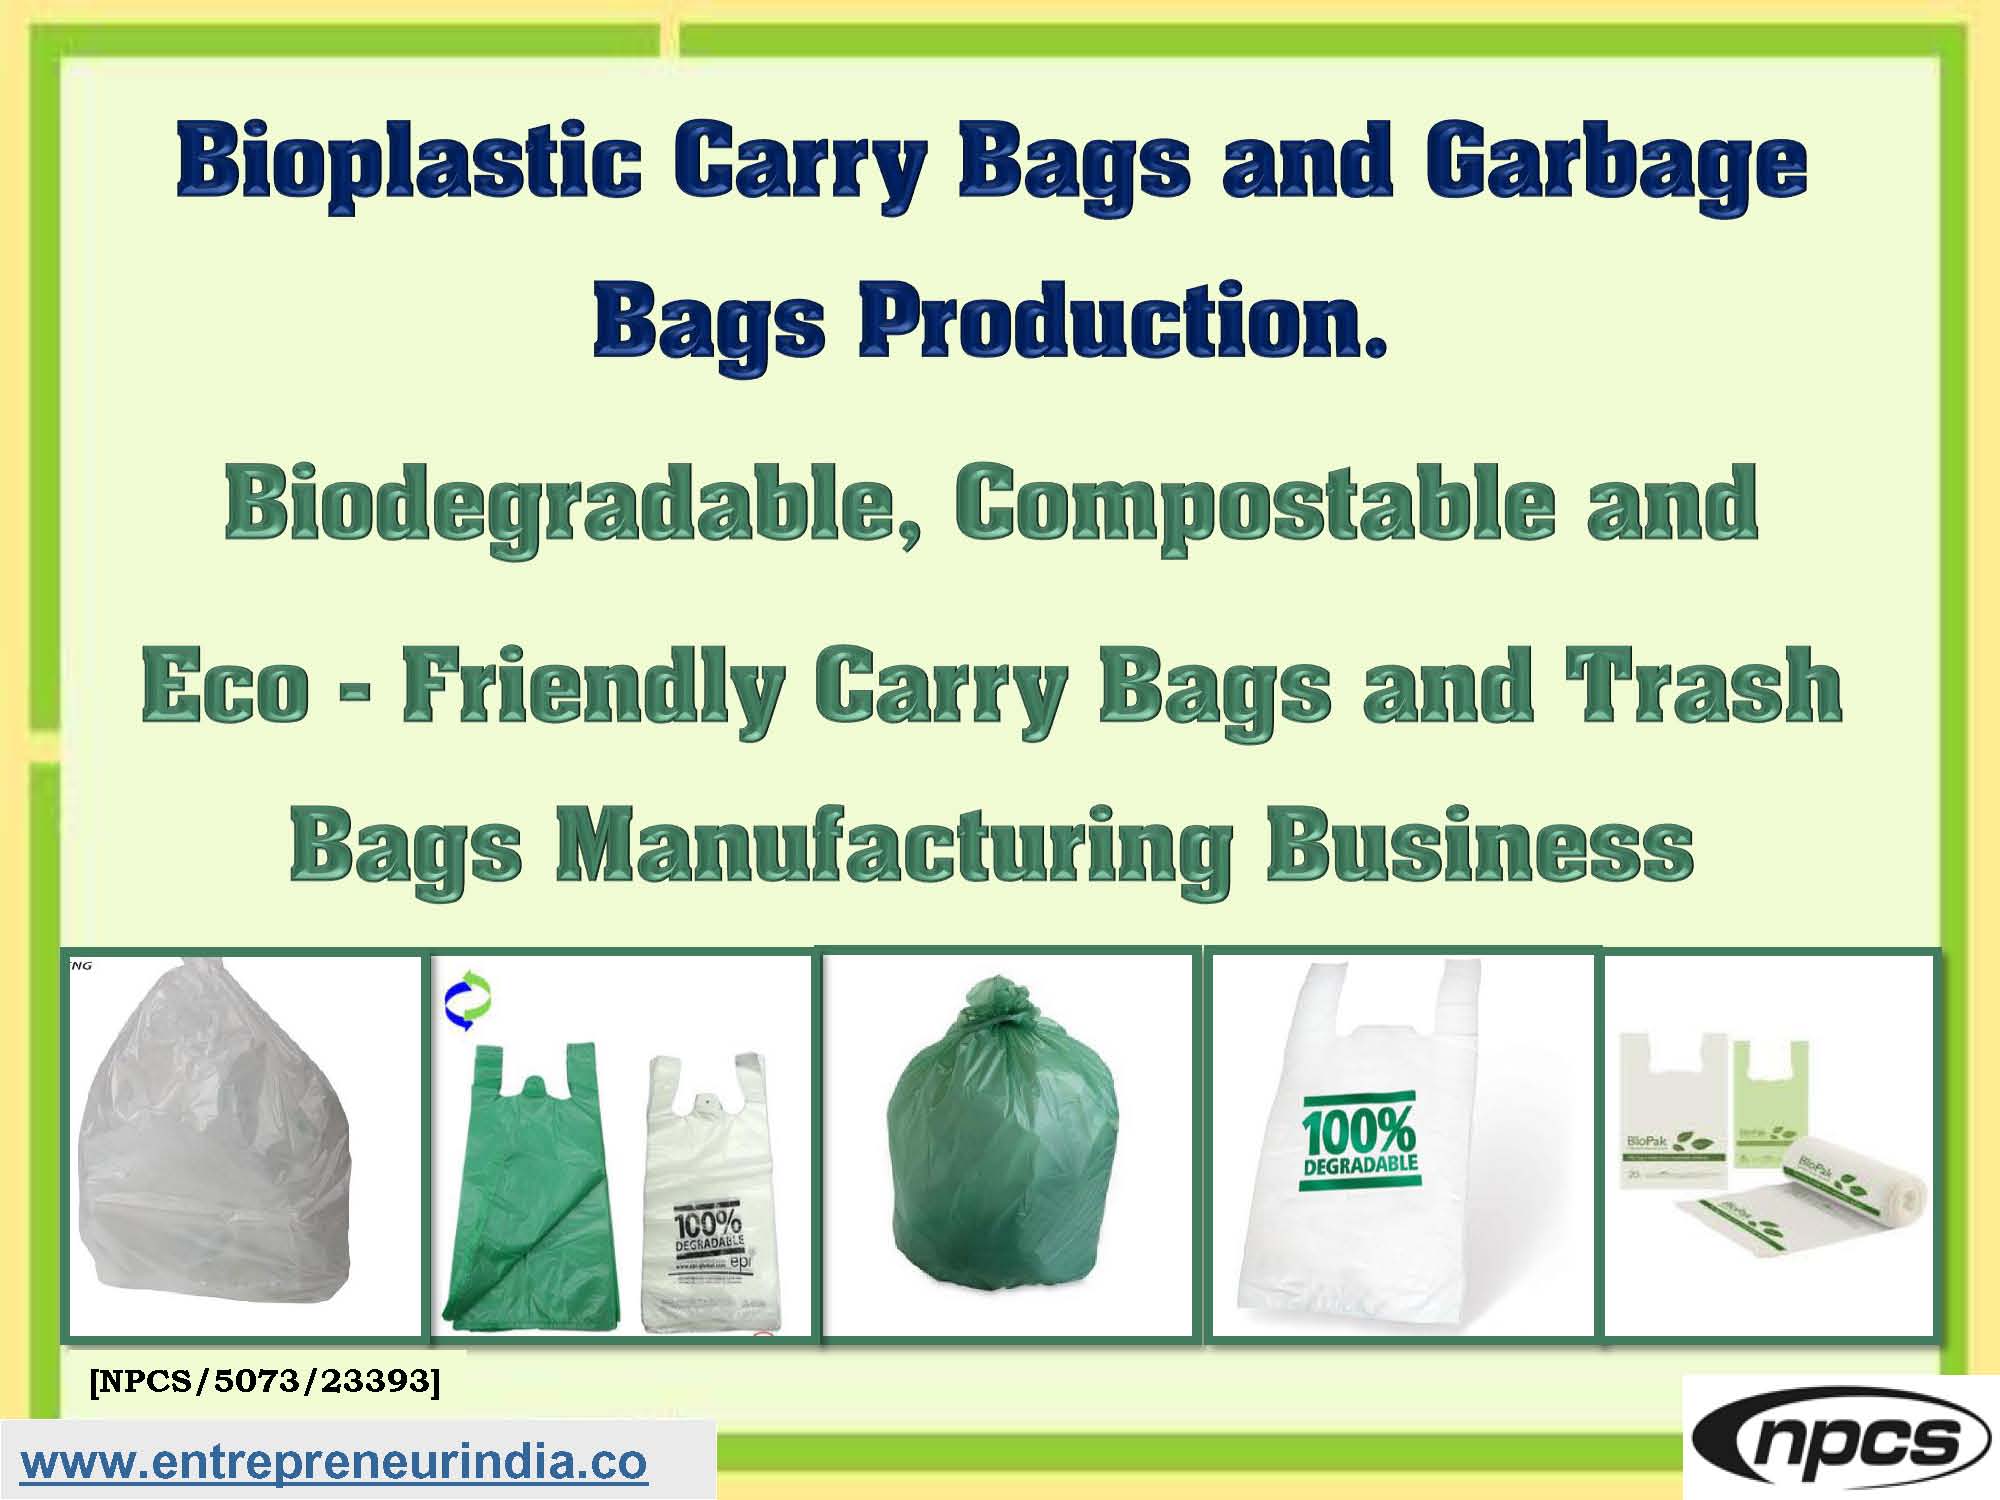 Bioplastic Carry Bags and Garbage Bags Production